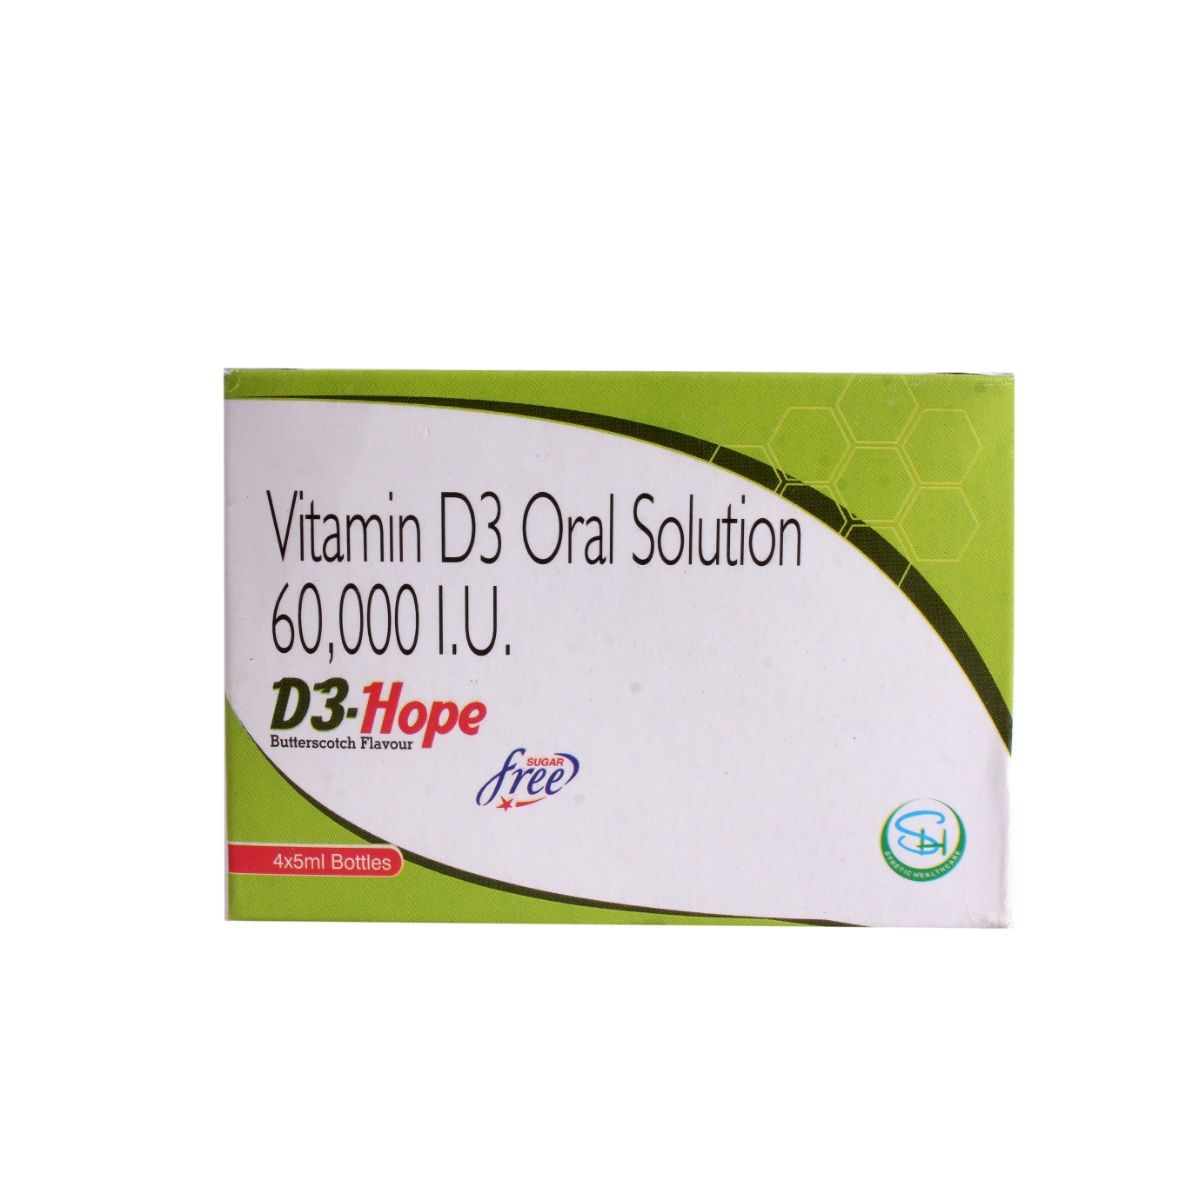 D3-Hope 60K Sugar Free Butterscotch Flavour Oral Solution 5 ml, Pack of 1 SOLUTION